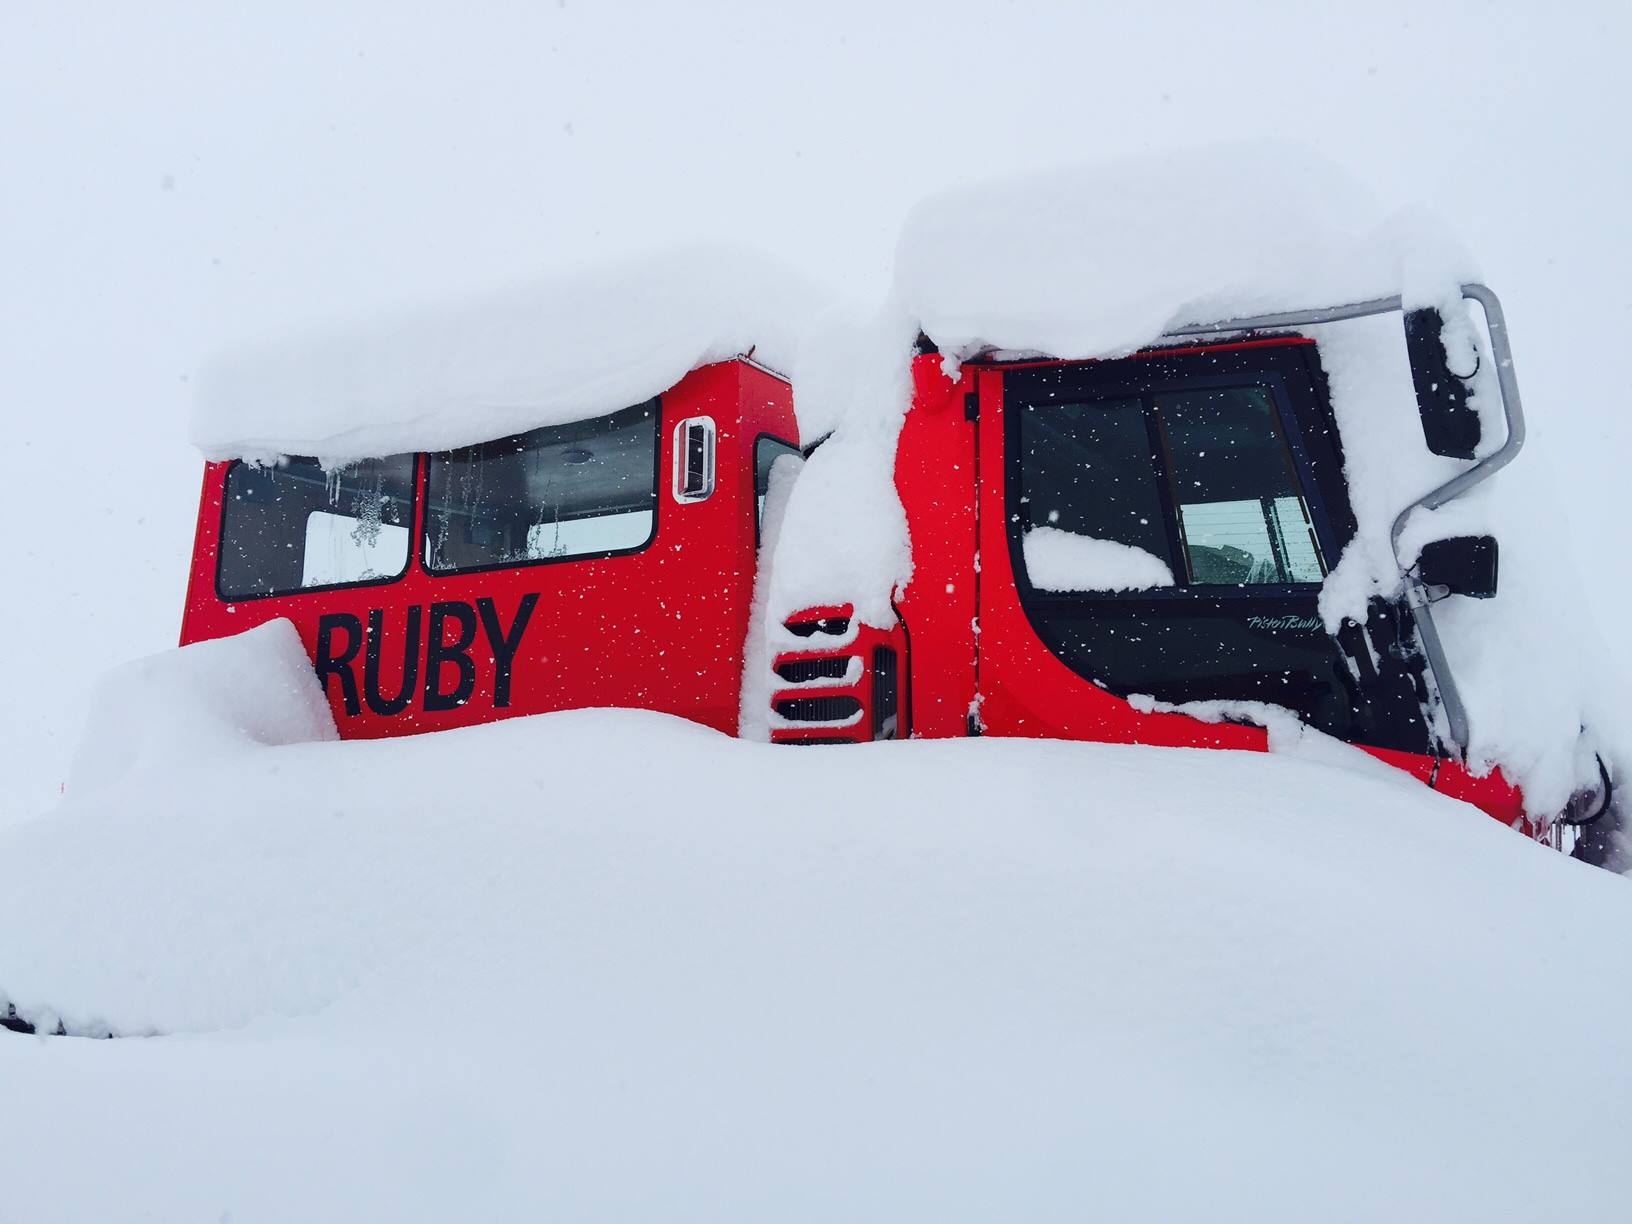 Snowcat buried in snow at Ruby Mountain Heli on March 29th. photo: ruby mountain heli experience